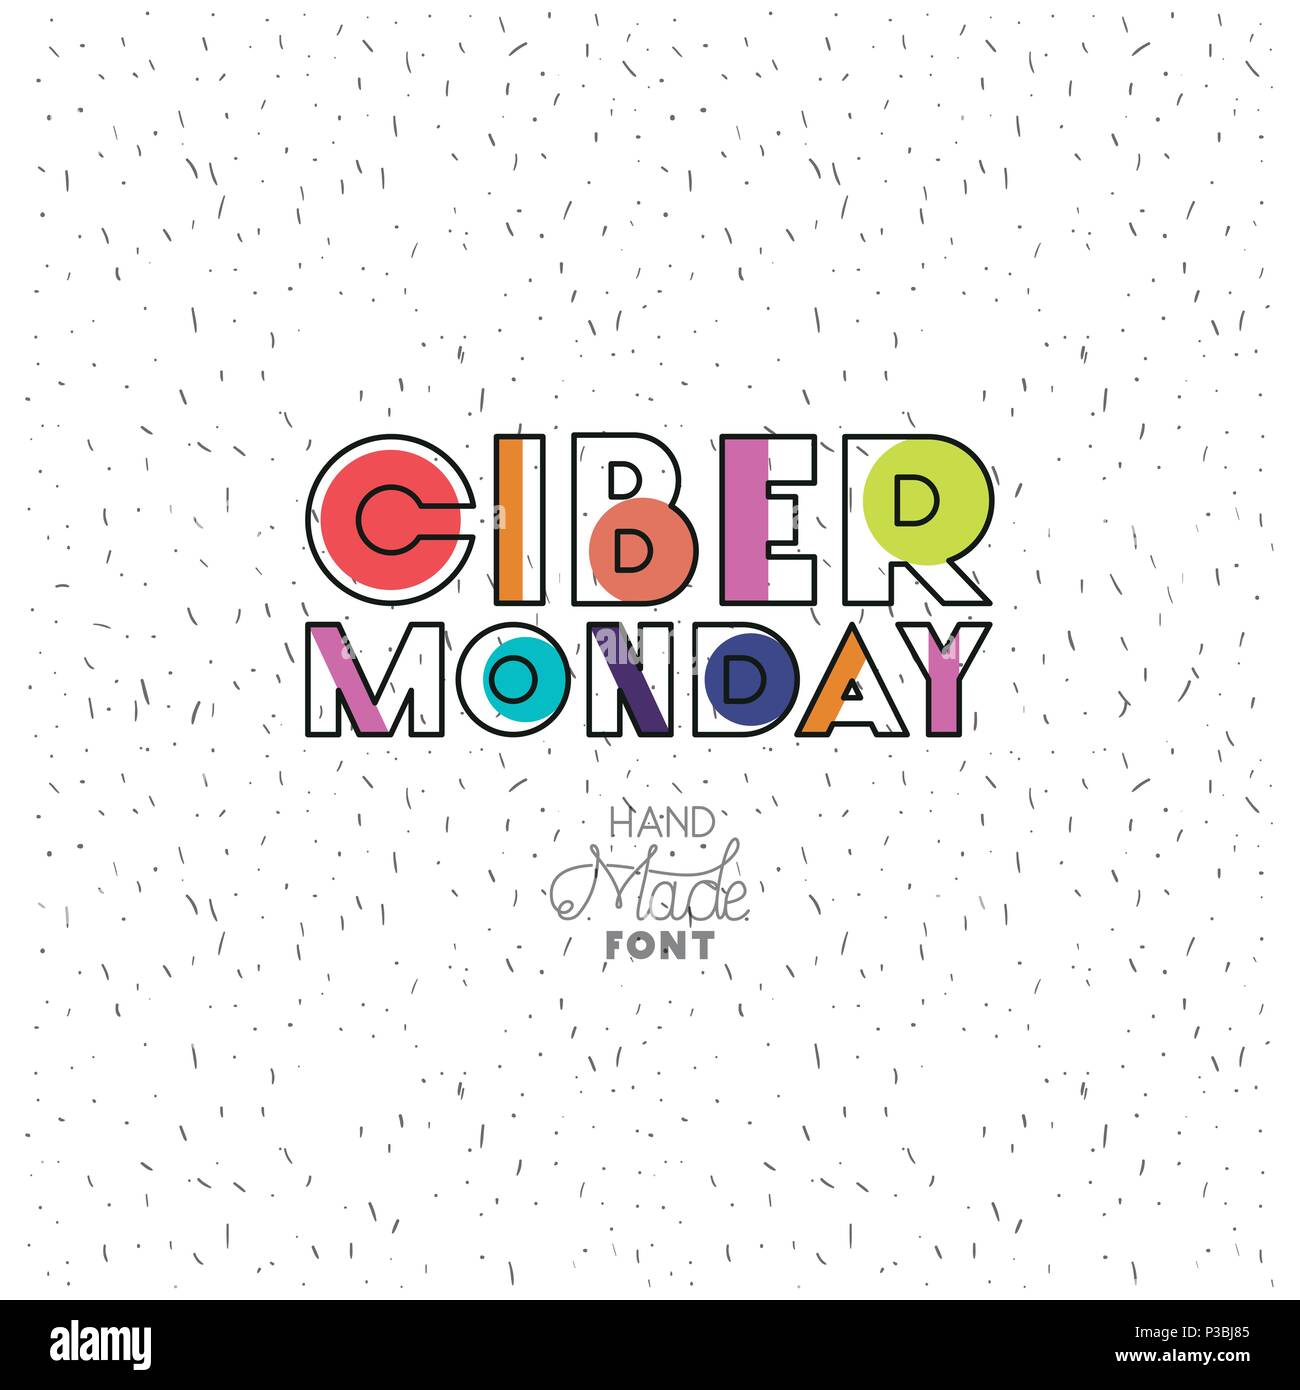 ciber monday message with hand made font Stock Vector